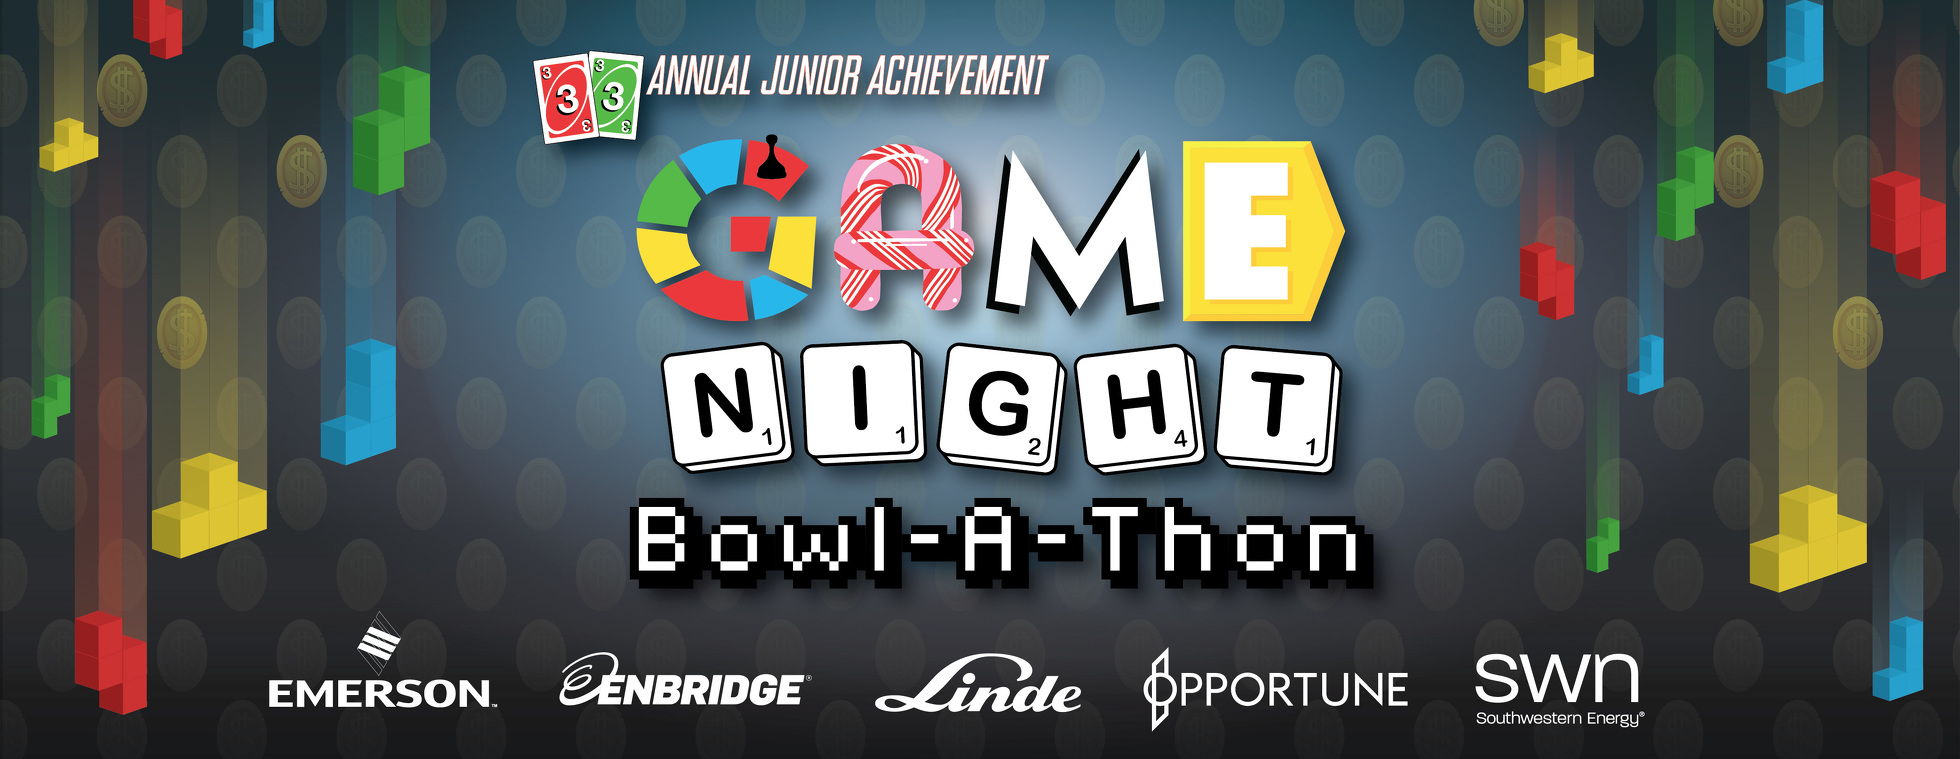 Woodforest Bank Bowl-A-Thon 2019